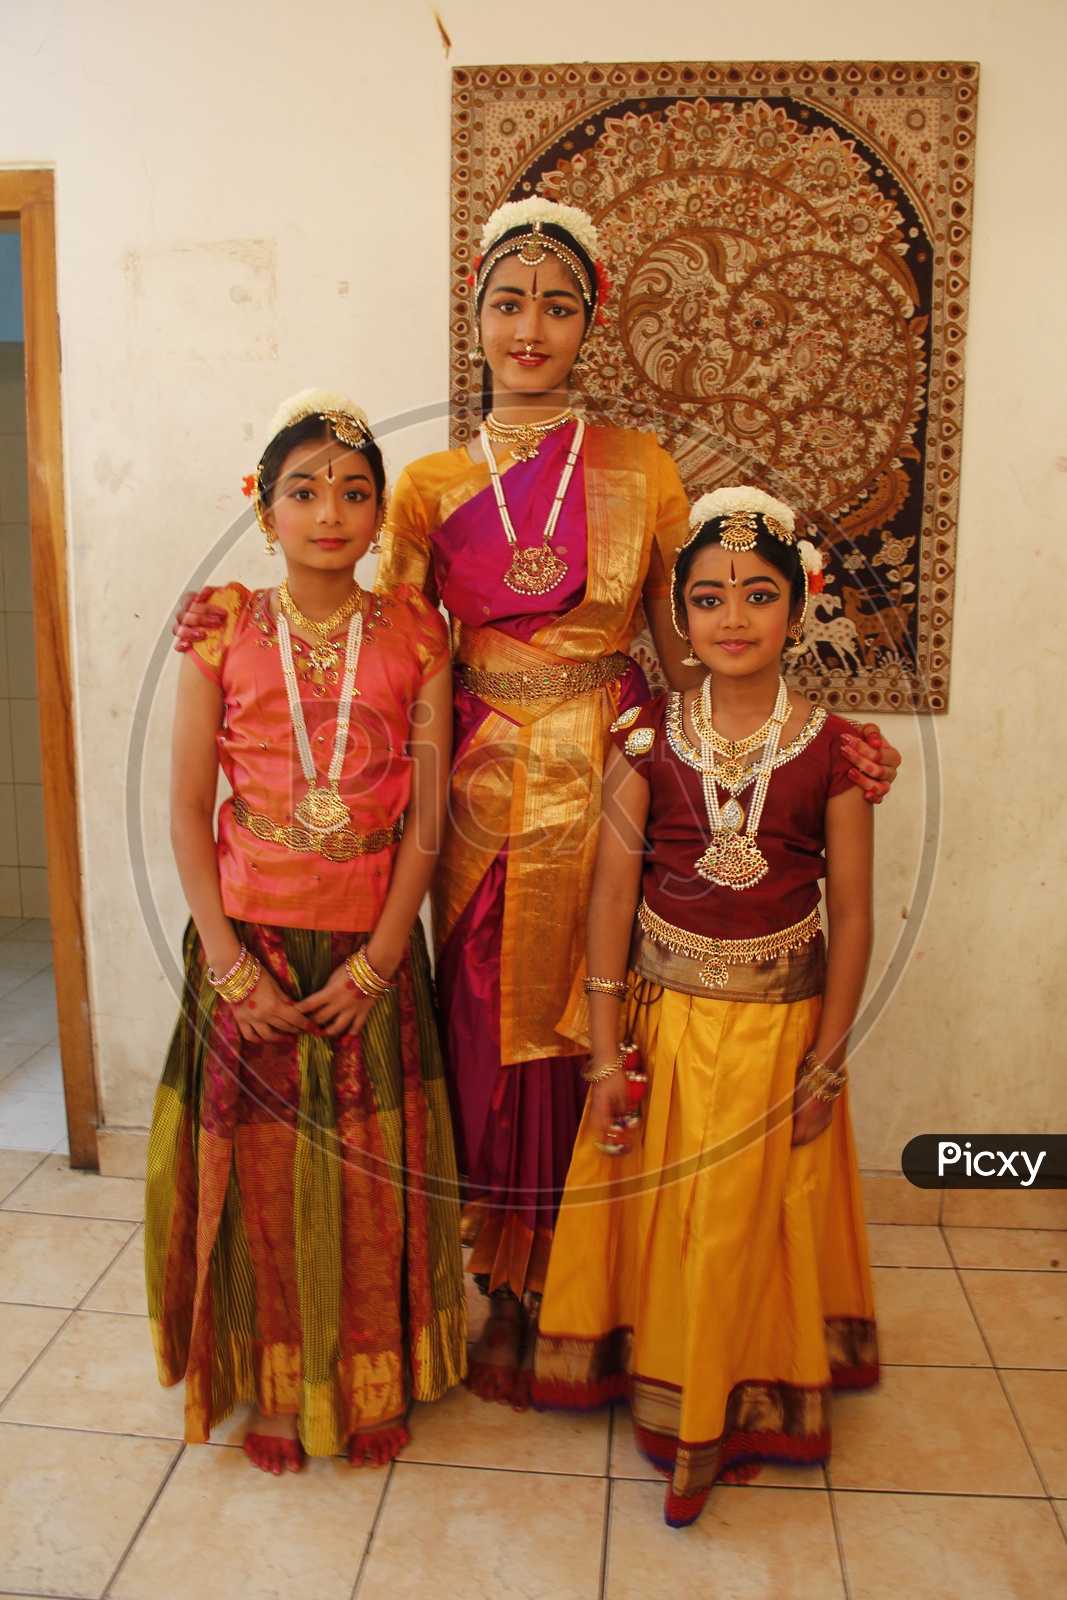 Indian Girls In a Traditional Attire For Performing Classical Dance